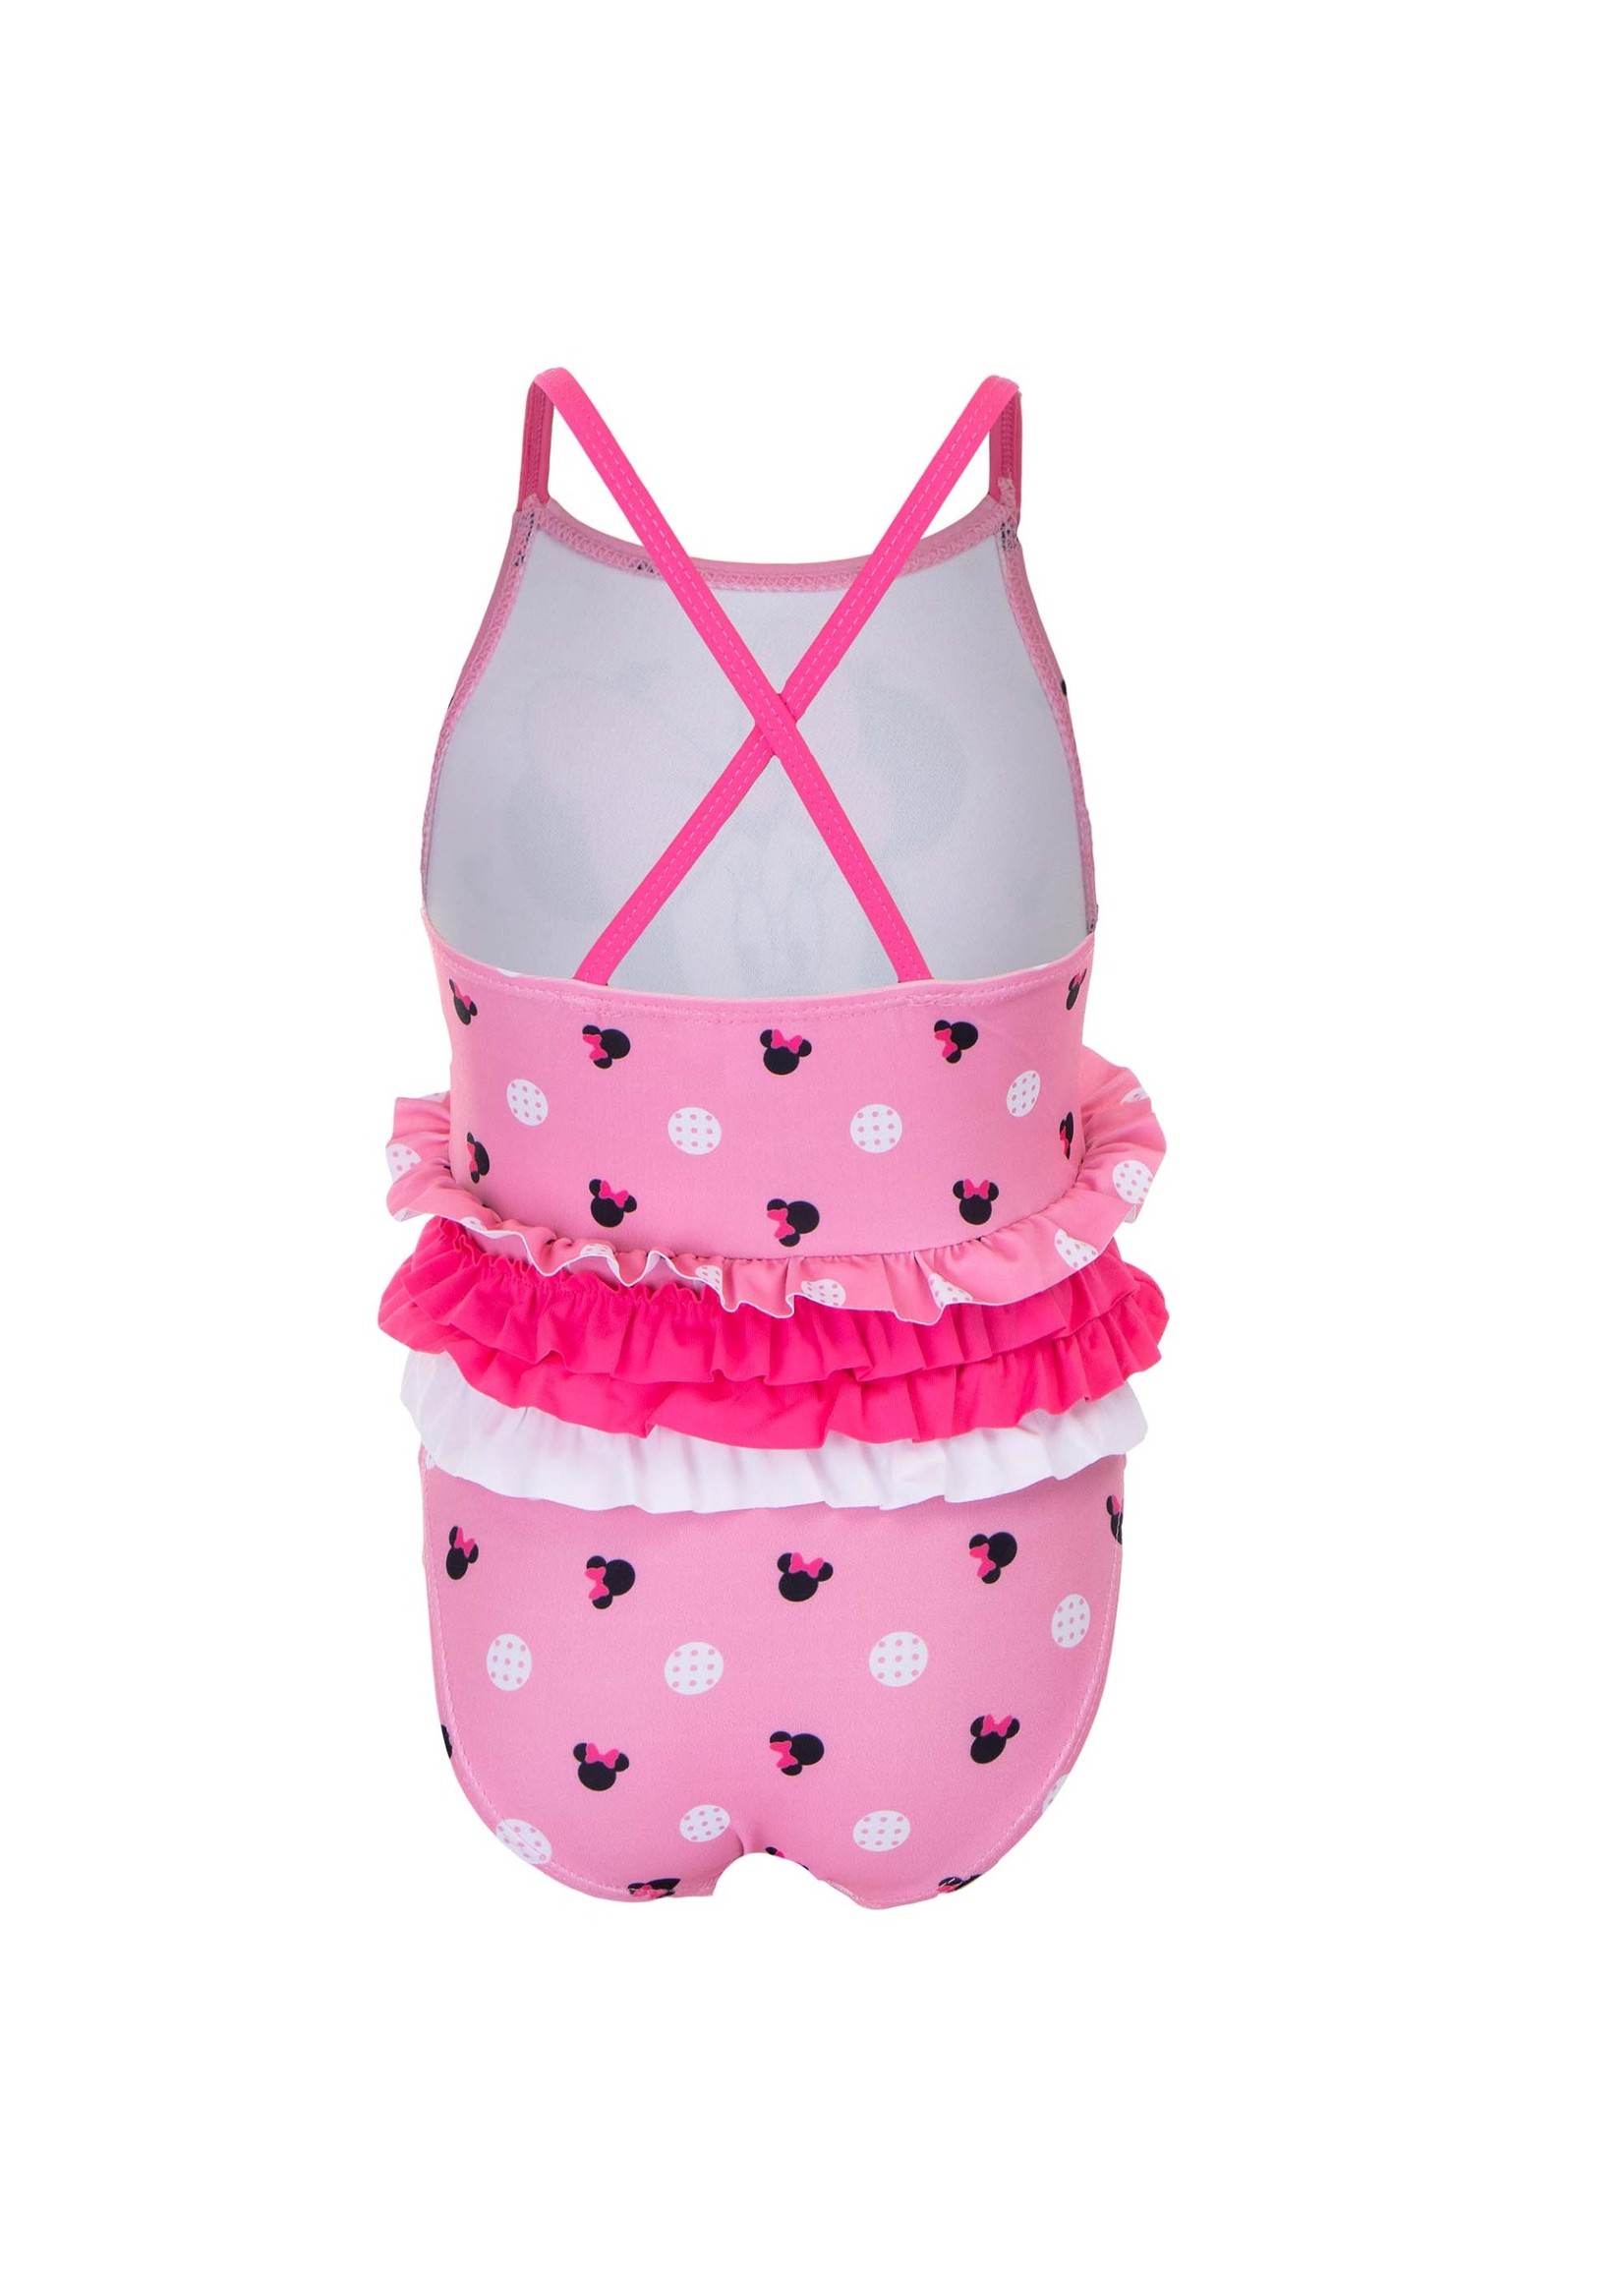 Disney baby Minnie Mouse swimsuit from Disney baby pink